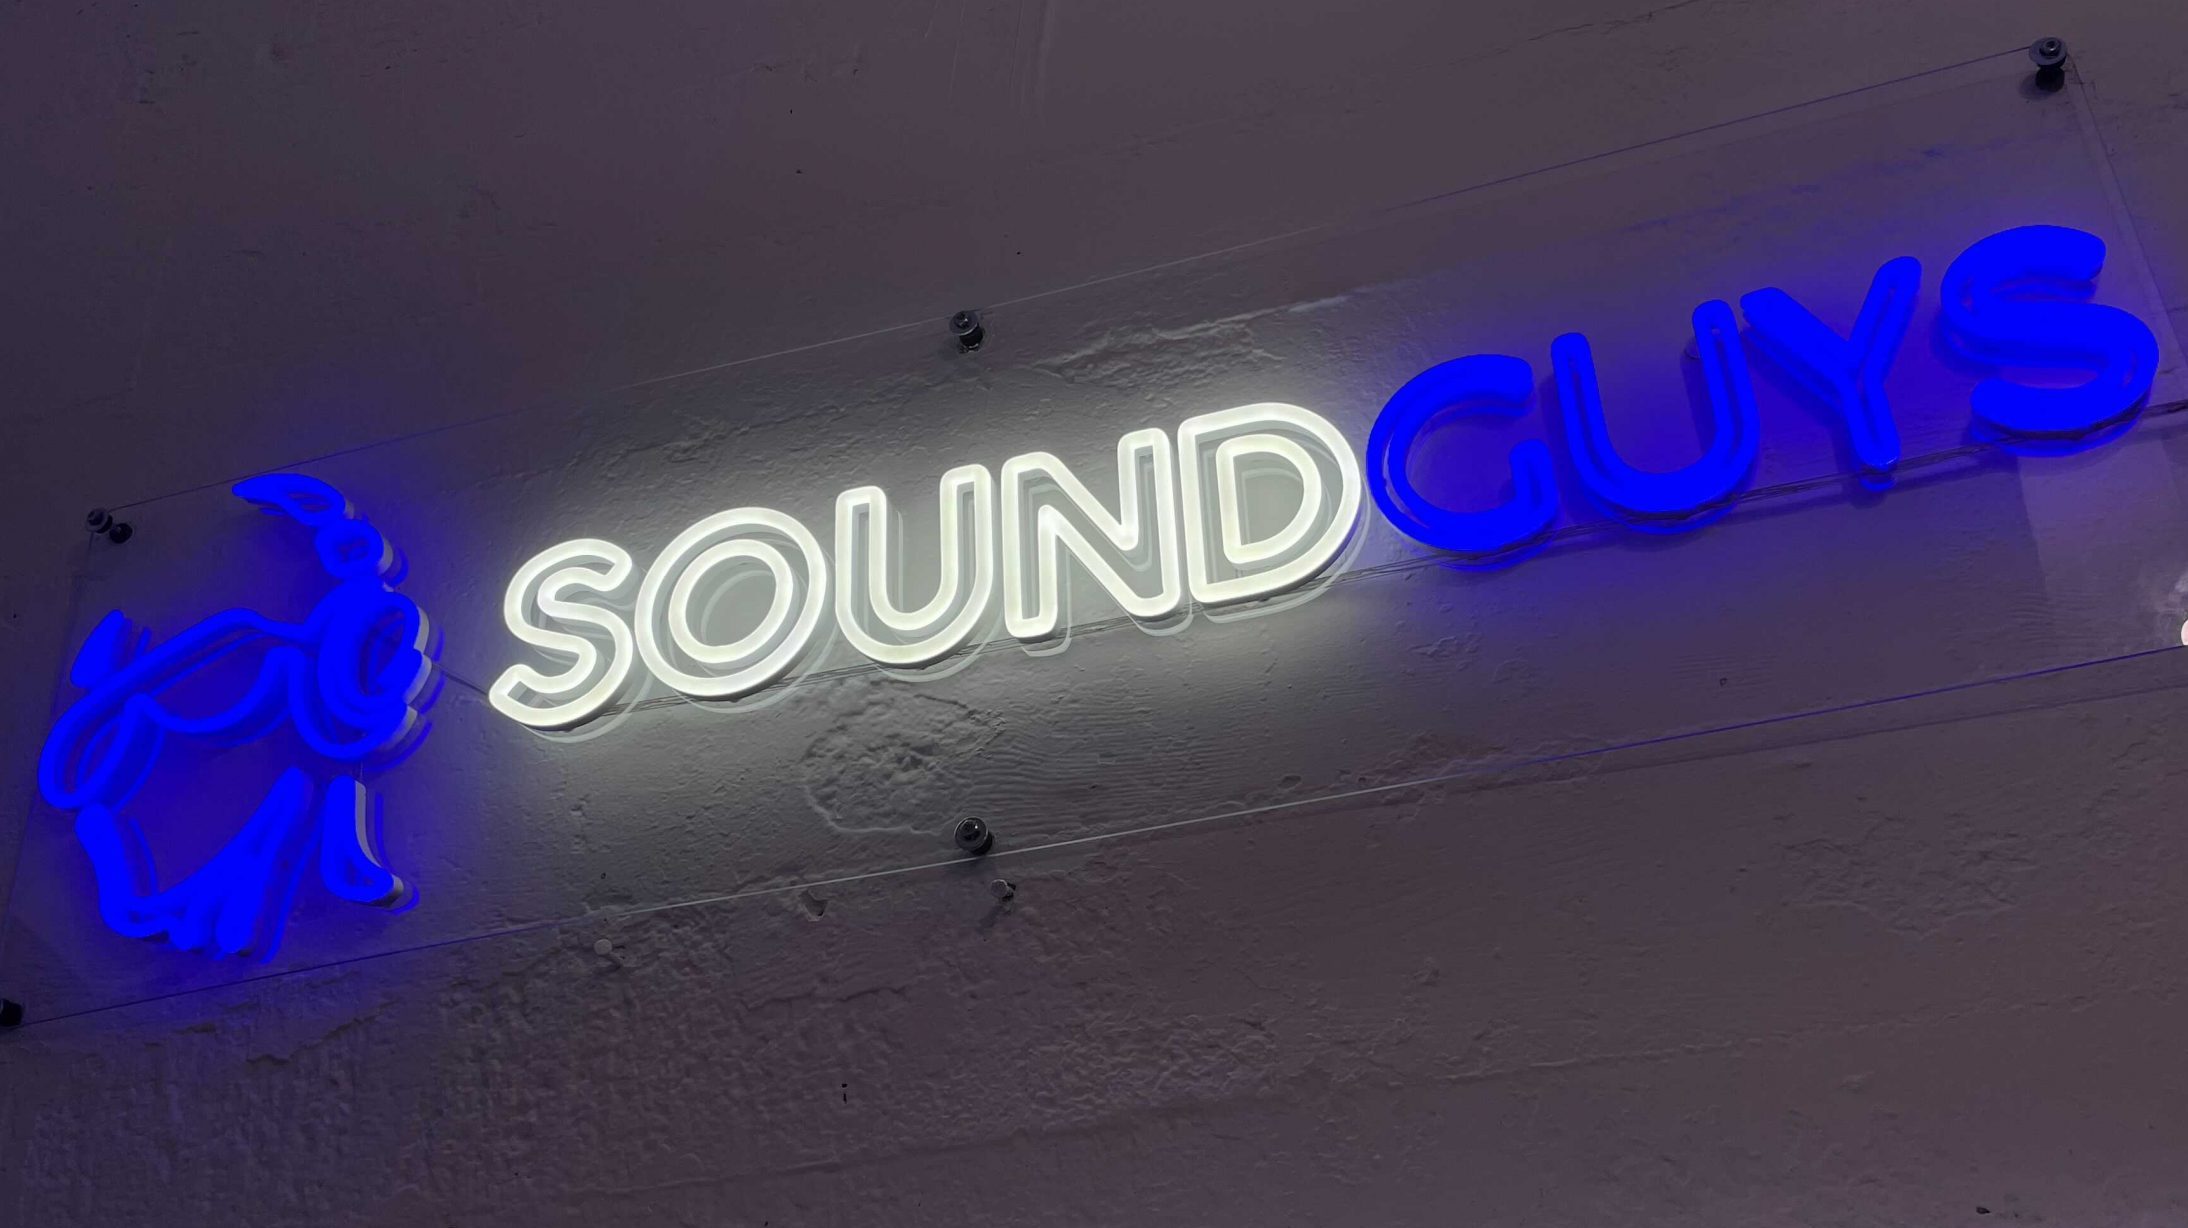 SoundGuys neon sign glows on the wall.